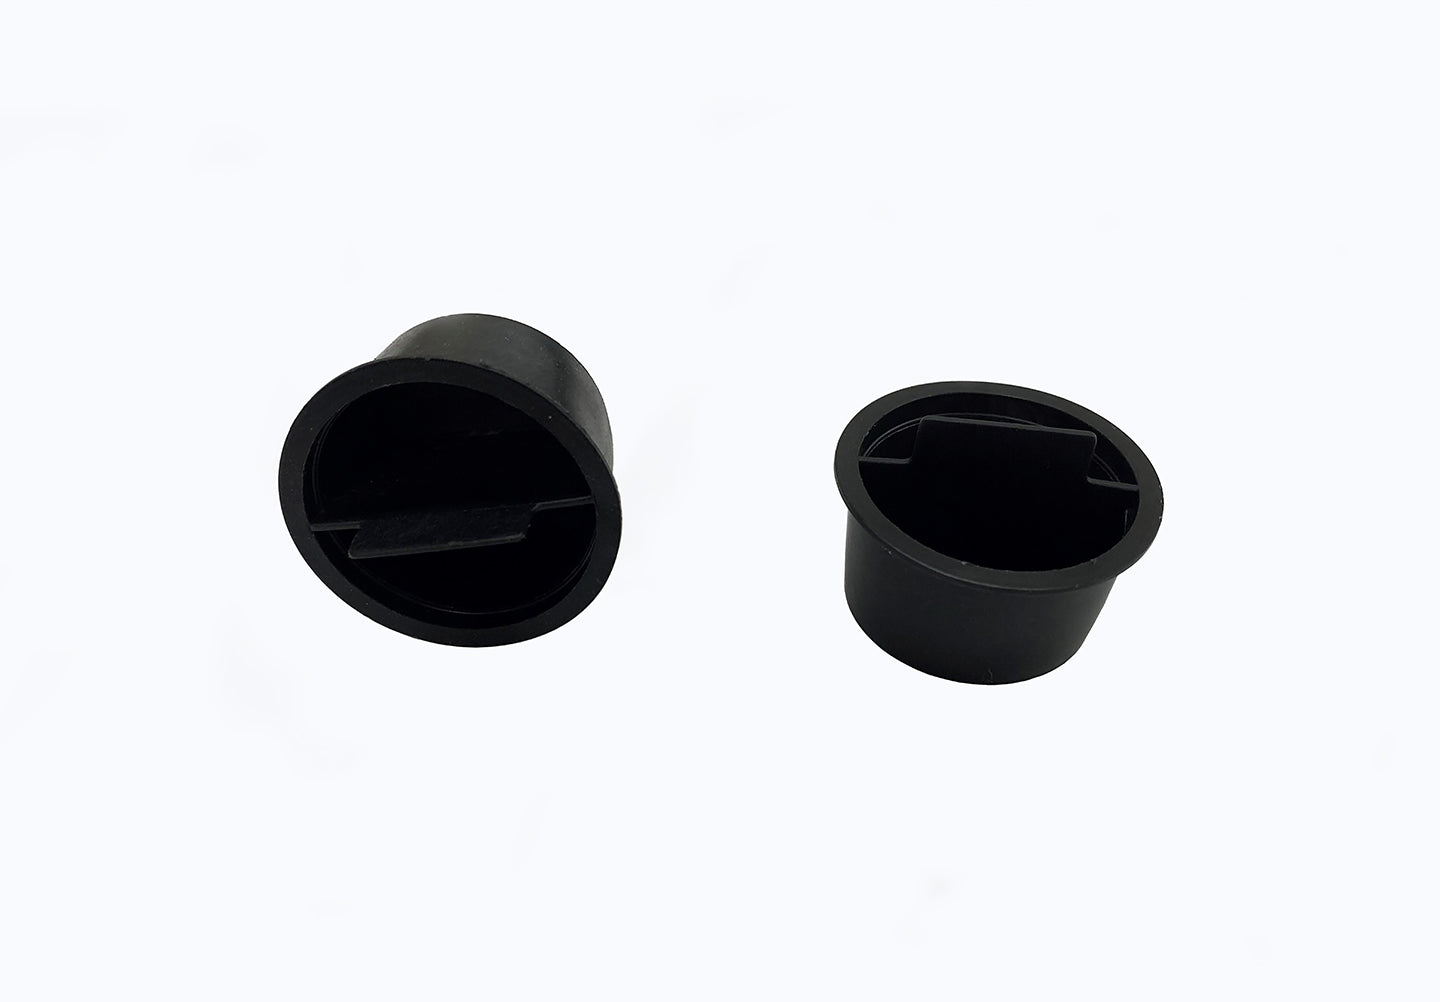 Replacement Receiver Cap Plugs for Removable Tab Baseplates.